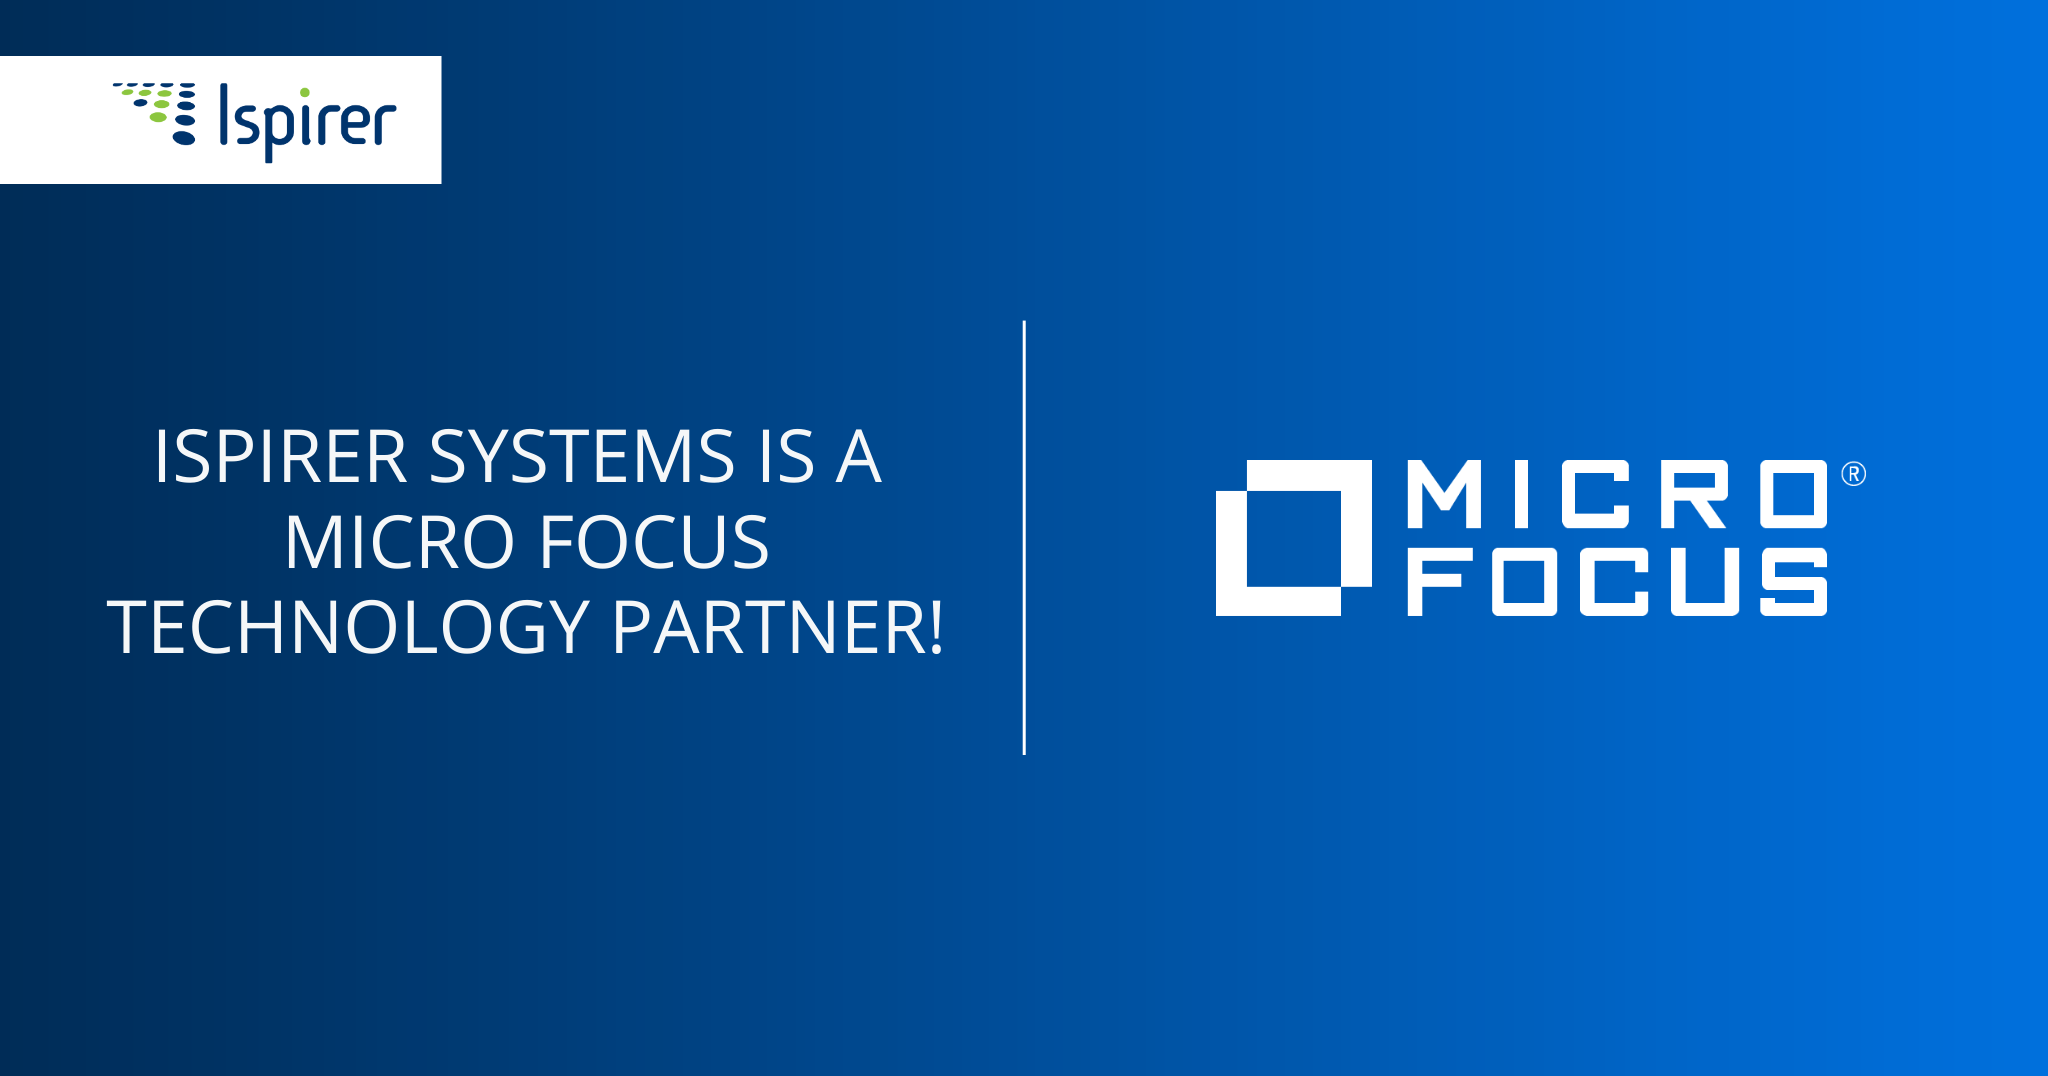 Ispirer and Micro Focus Partnership Image